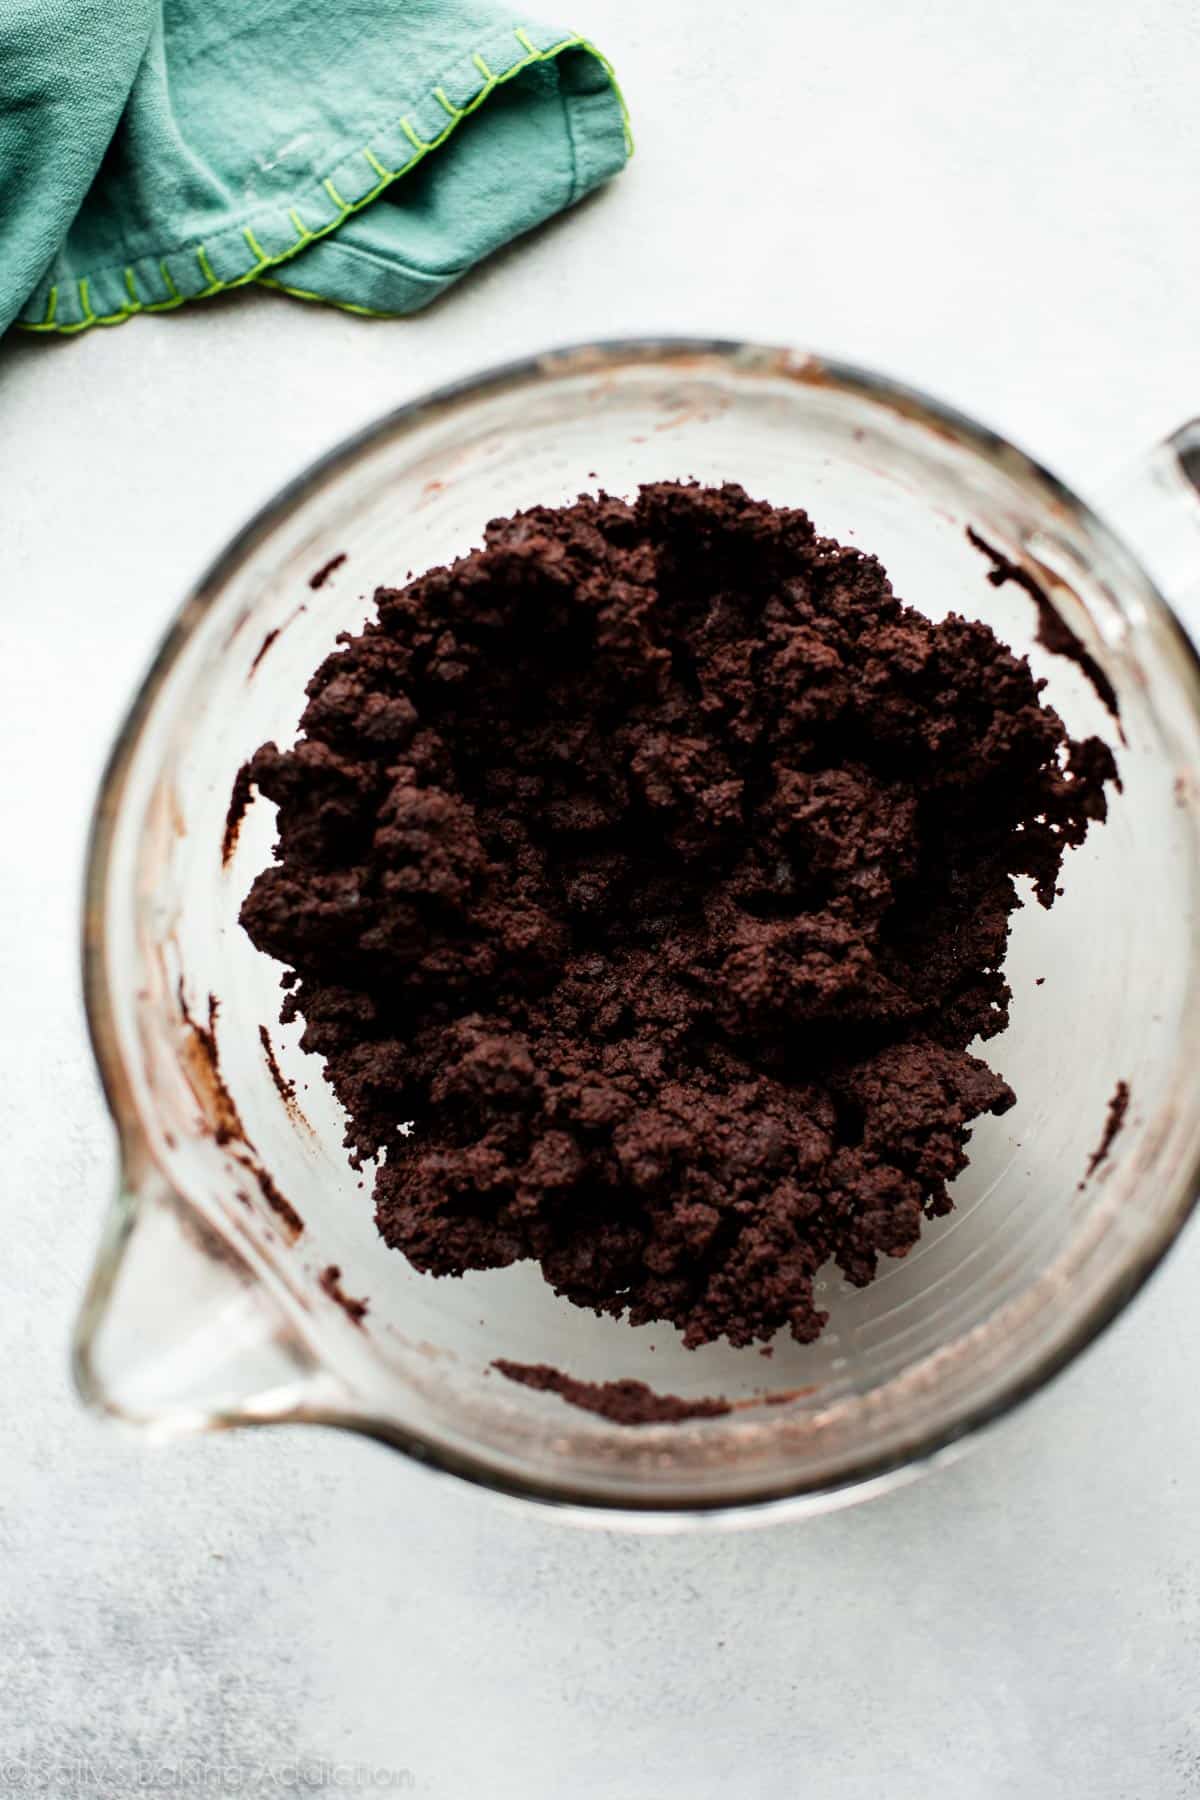 chocolate cake and chocolate frosting mixture in a glass bowl